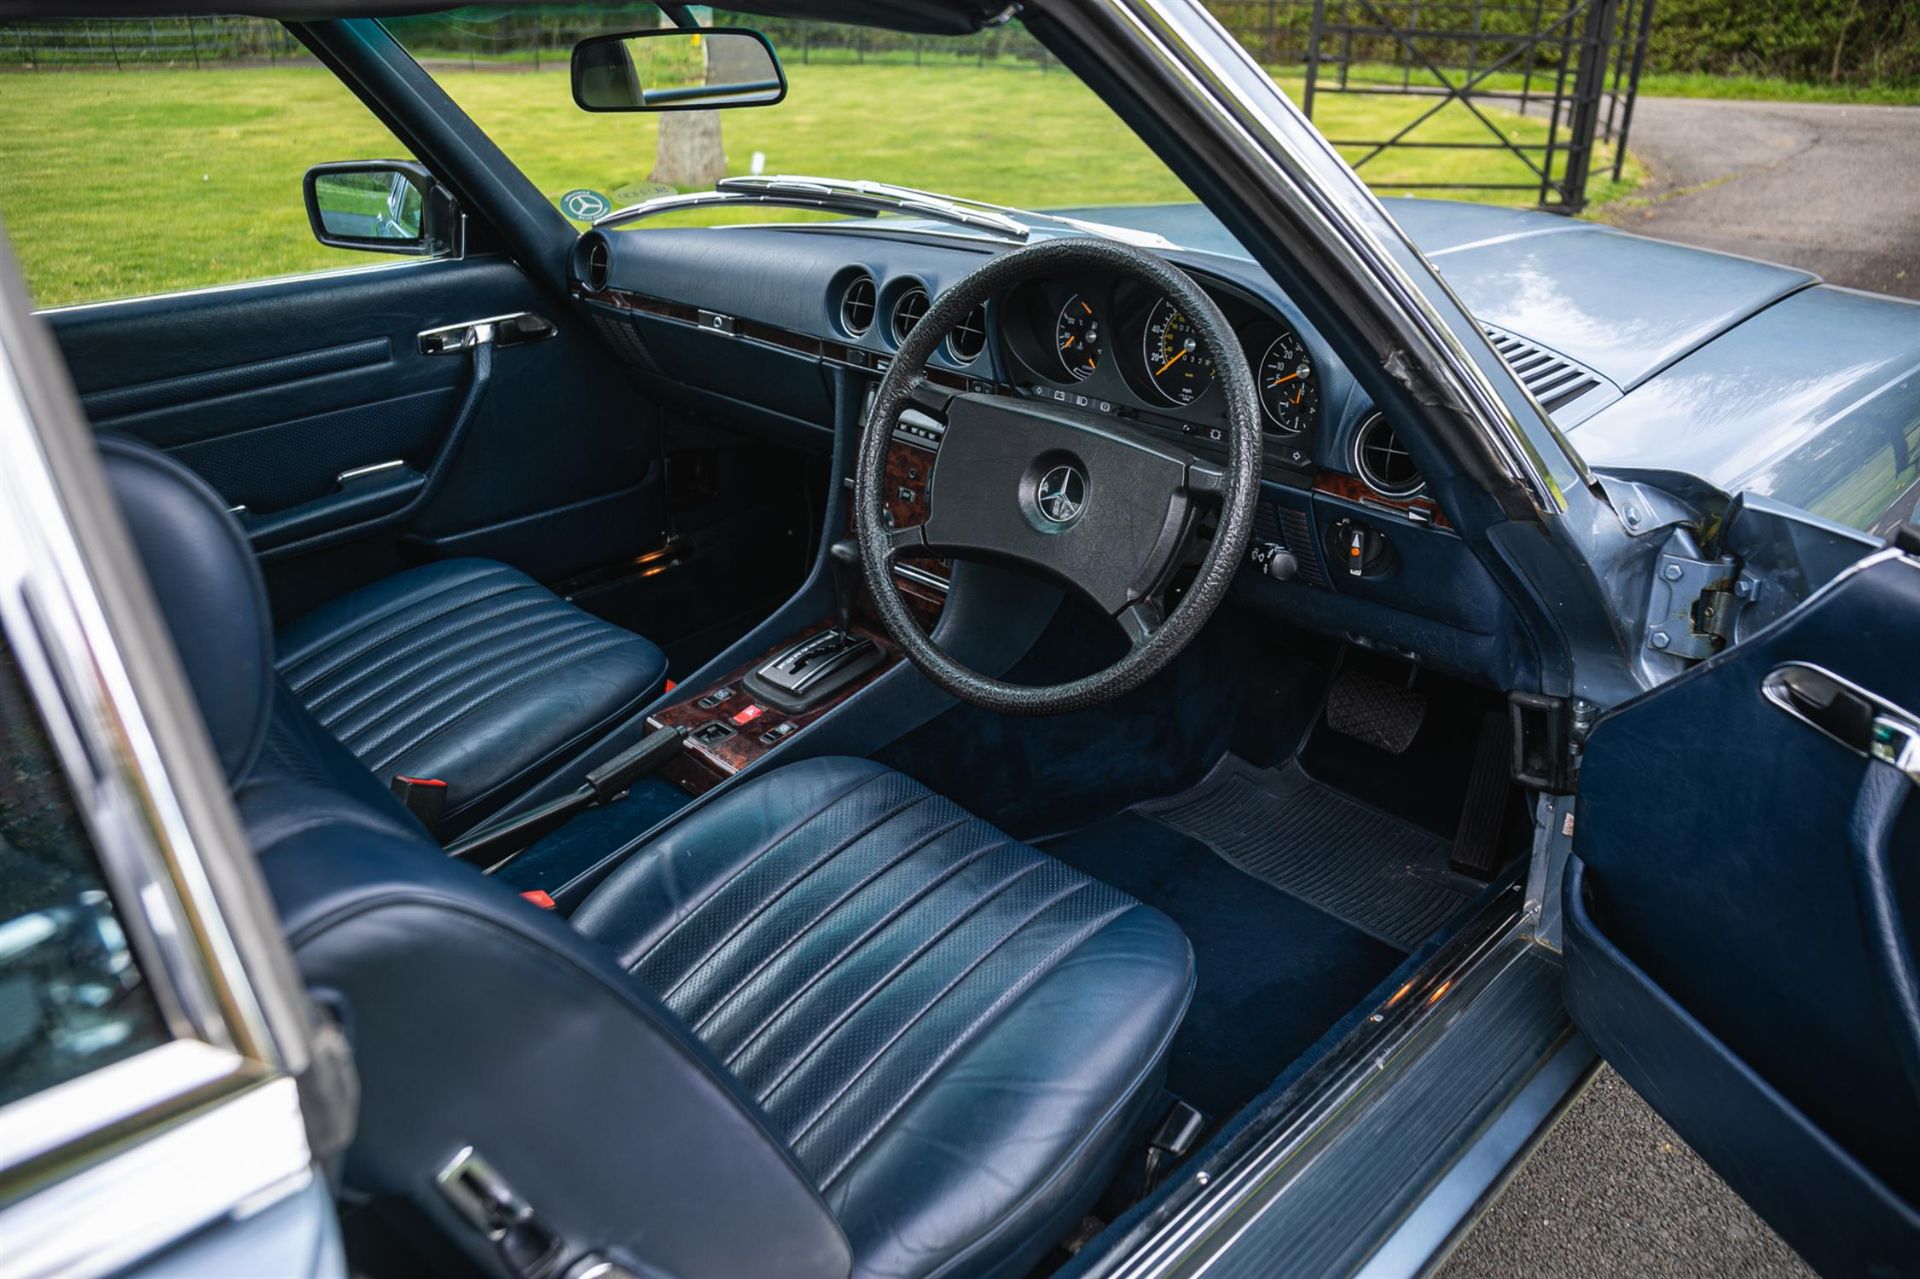 1985 Mercedes Benz 280SL (R107) with hardtop - 28,700 Miles - Image 2 of 10